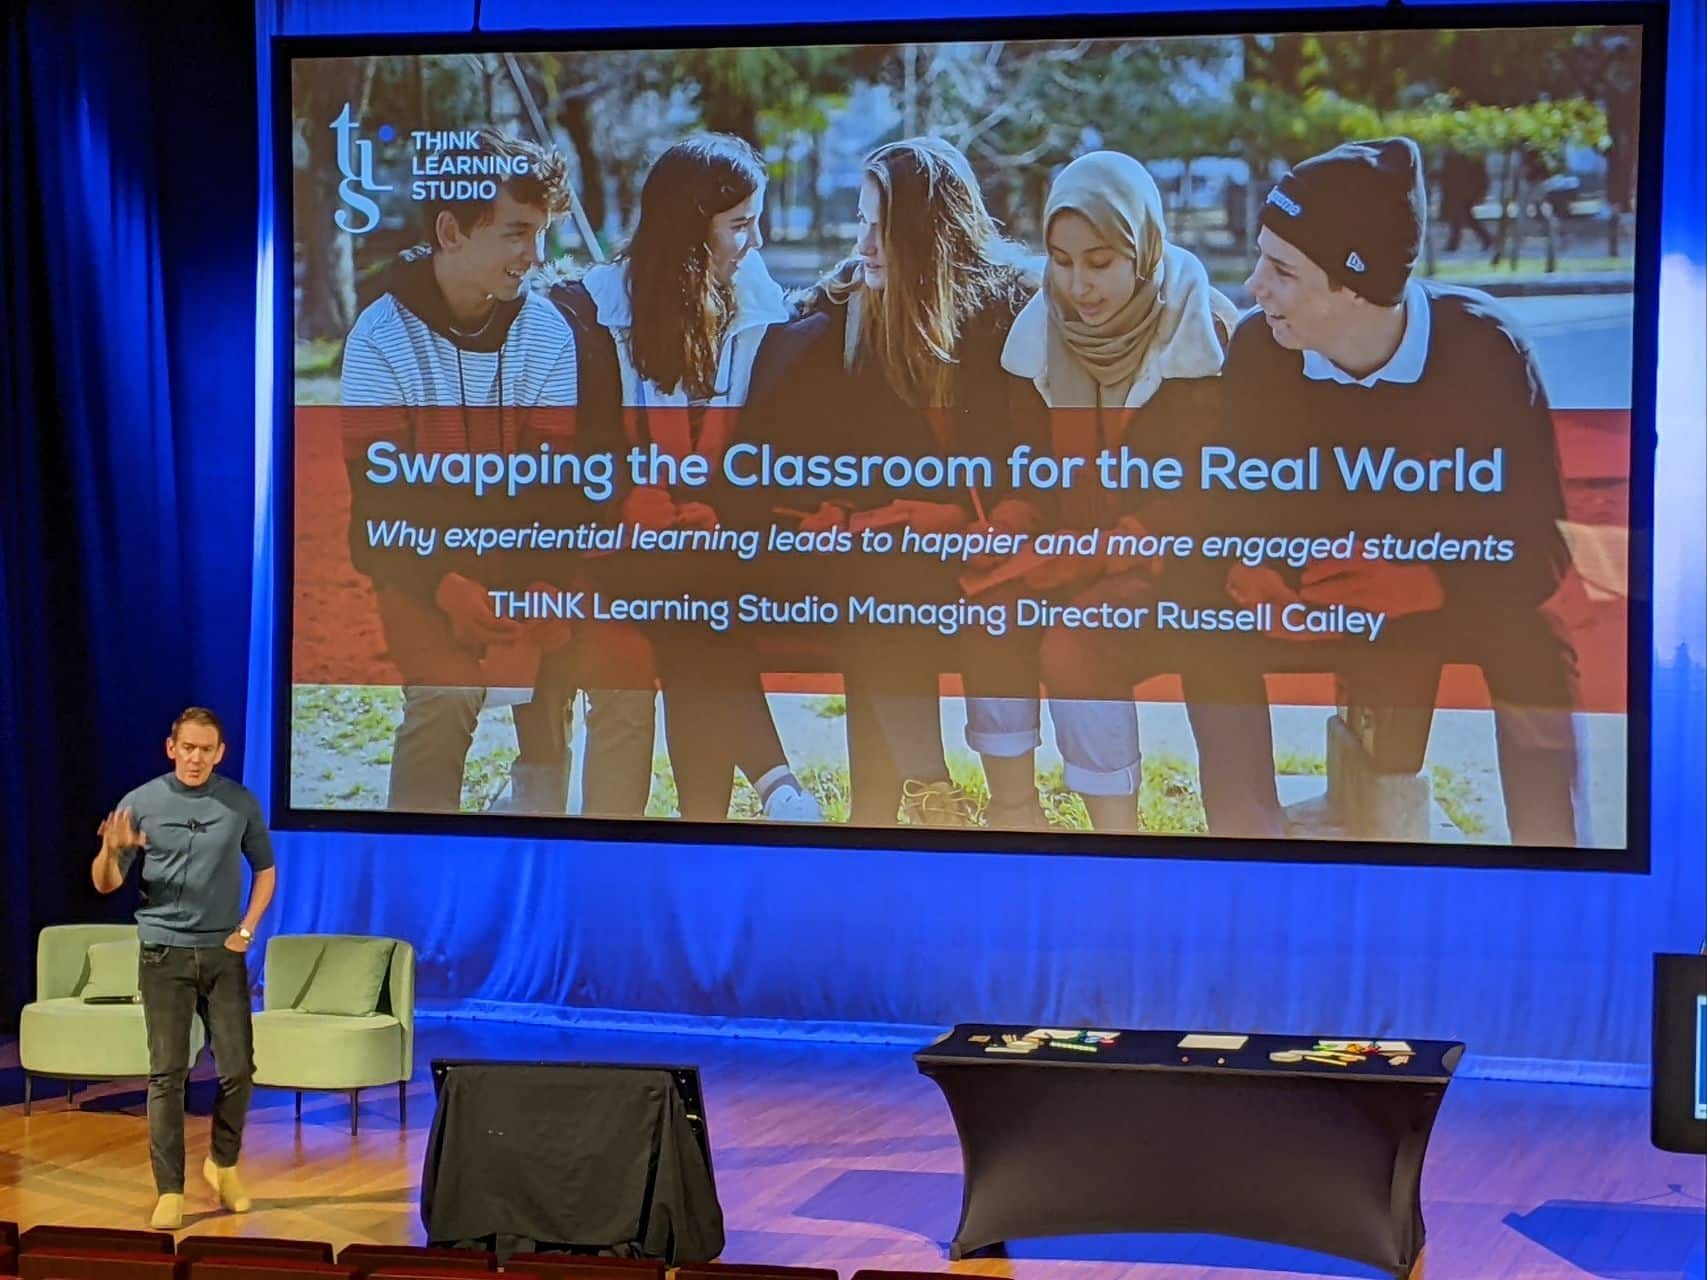 Rus Speaks at Australian Education Conference: “Why Experiential Learning Leads to Happier and More Engaged Students”